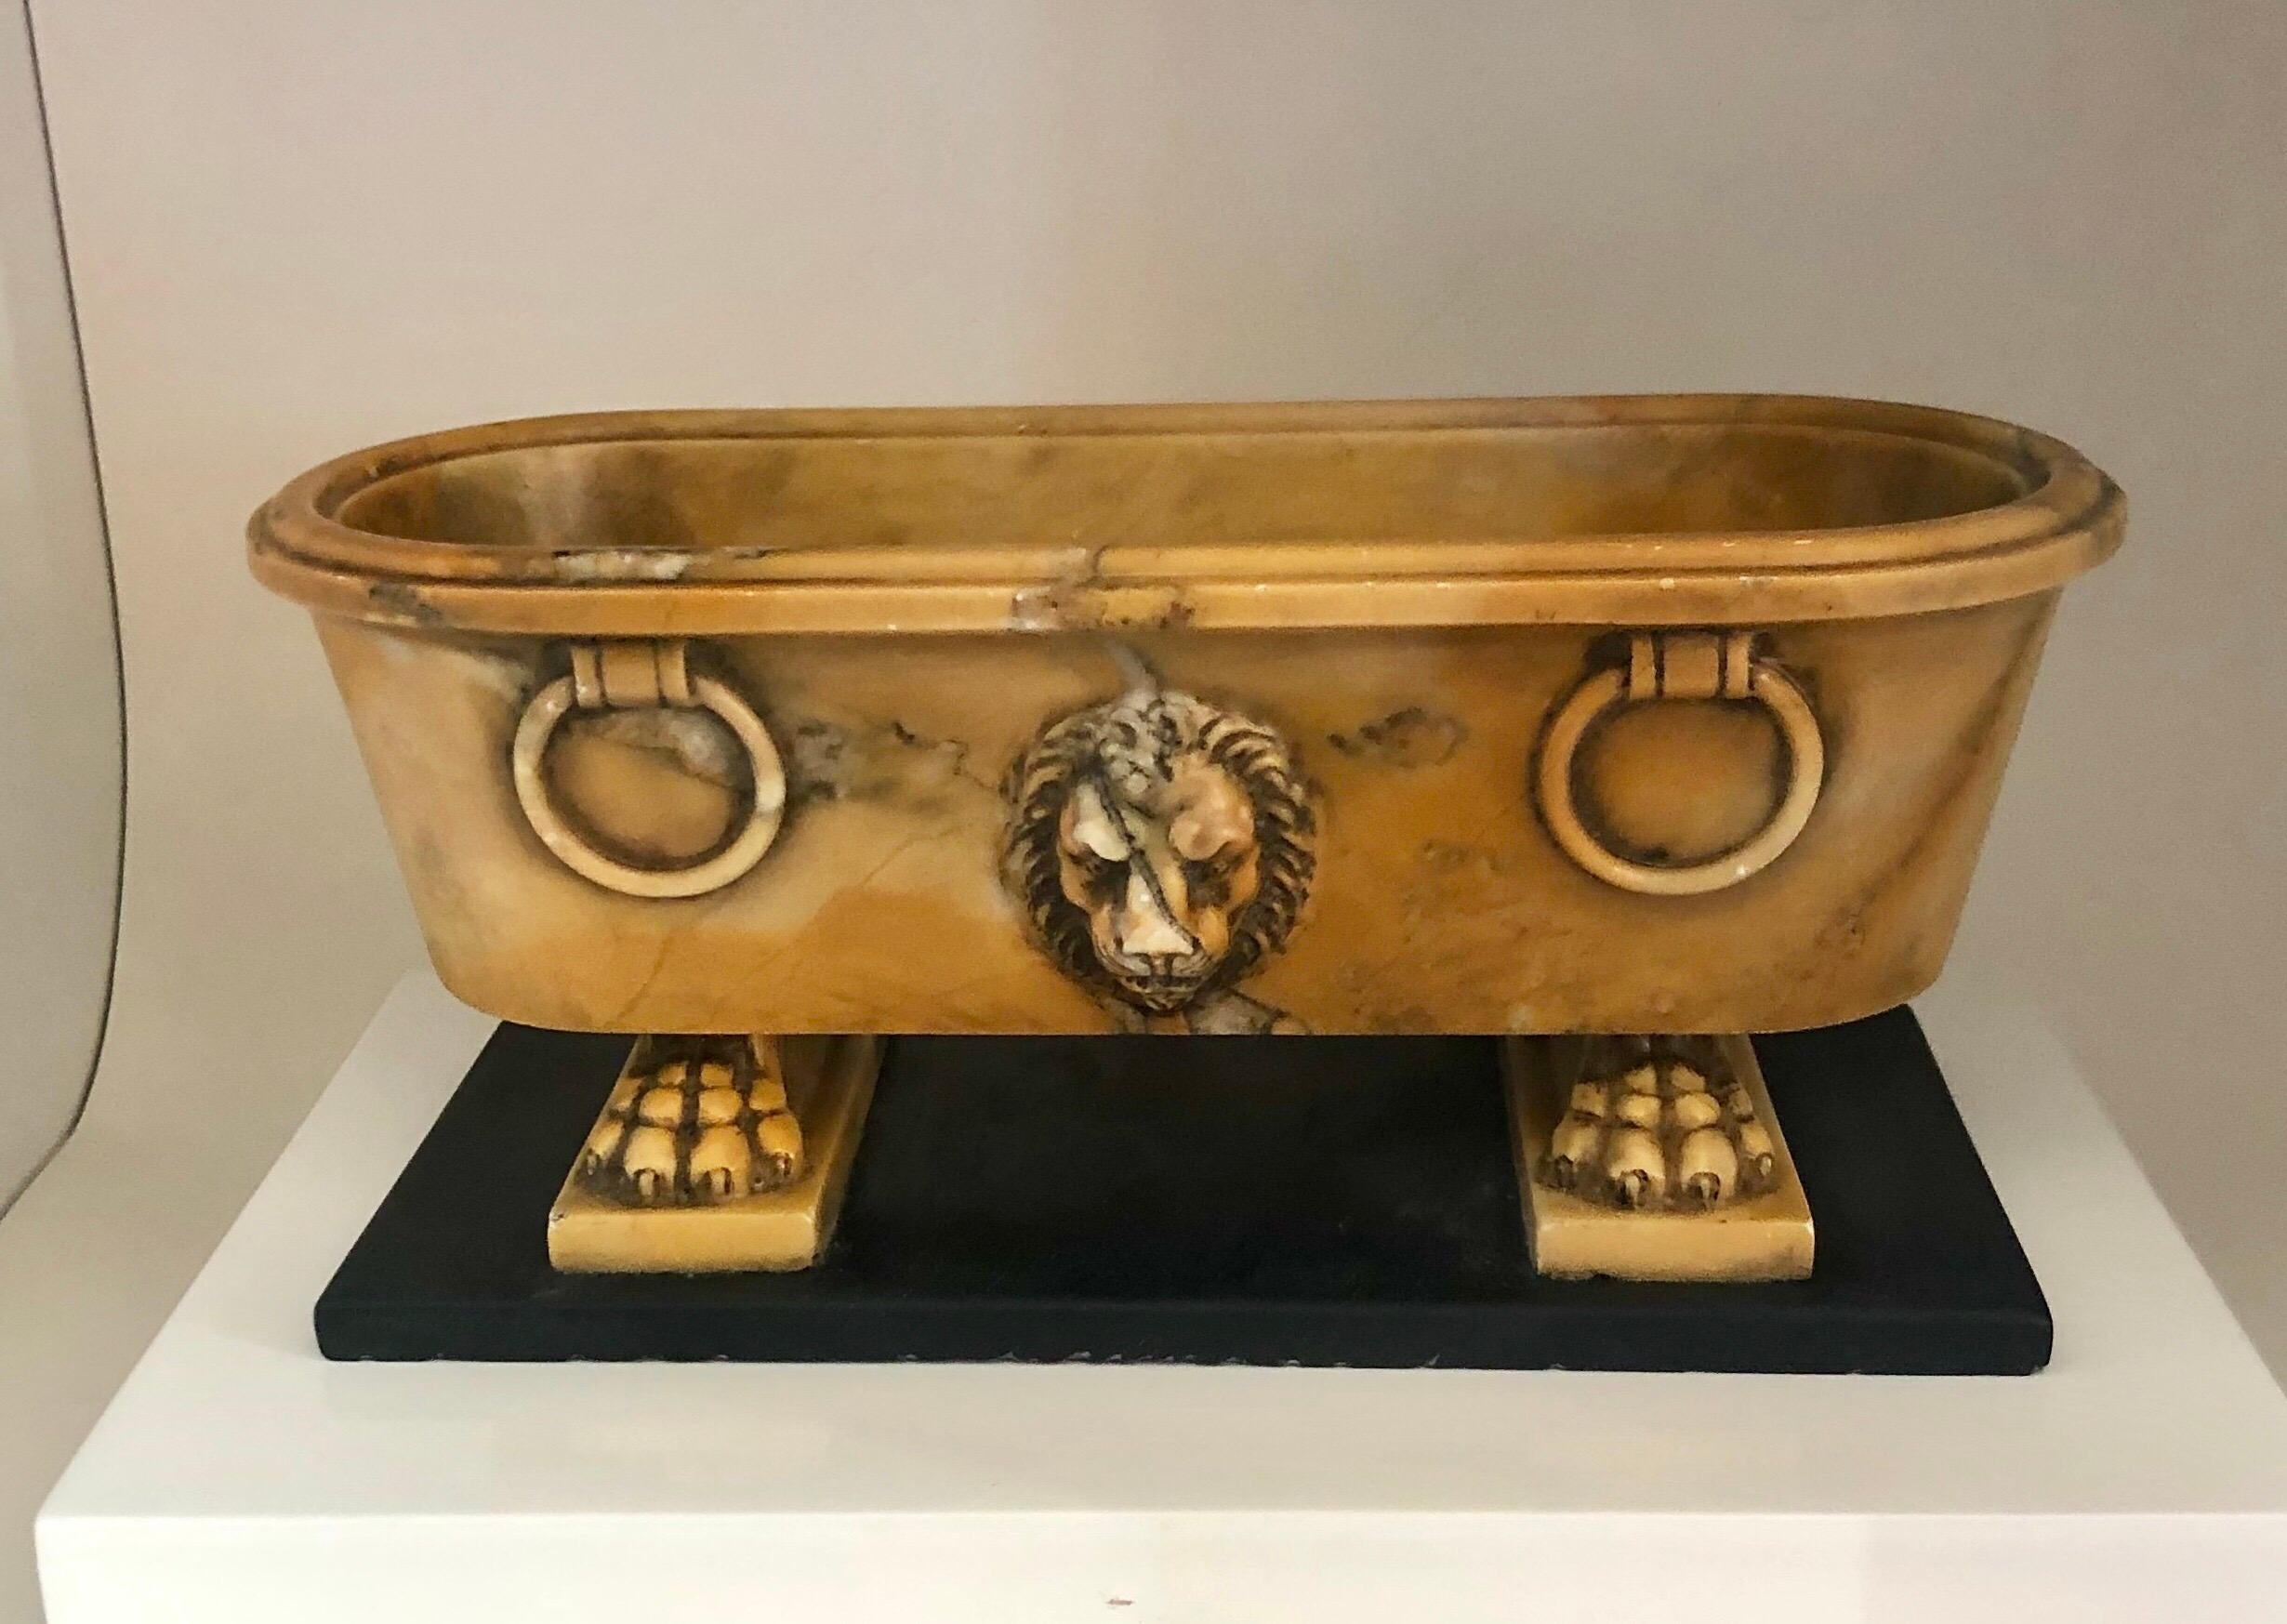 The miniature model with lion’s head’s centered on both sides, and 2 pairs of carved faux ringed handles resting on lions’s paw feet.